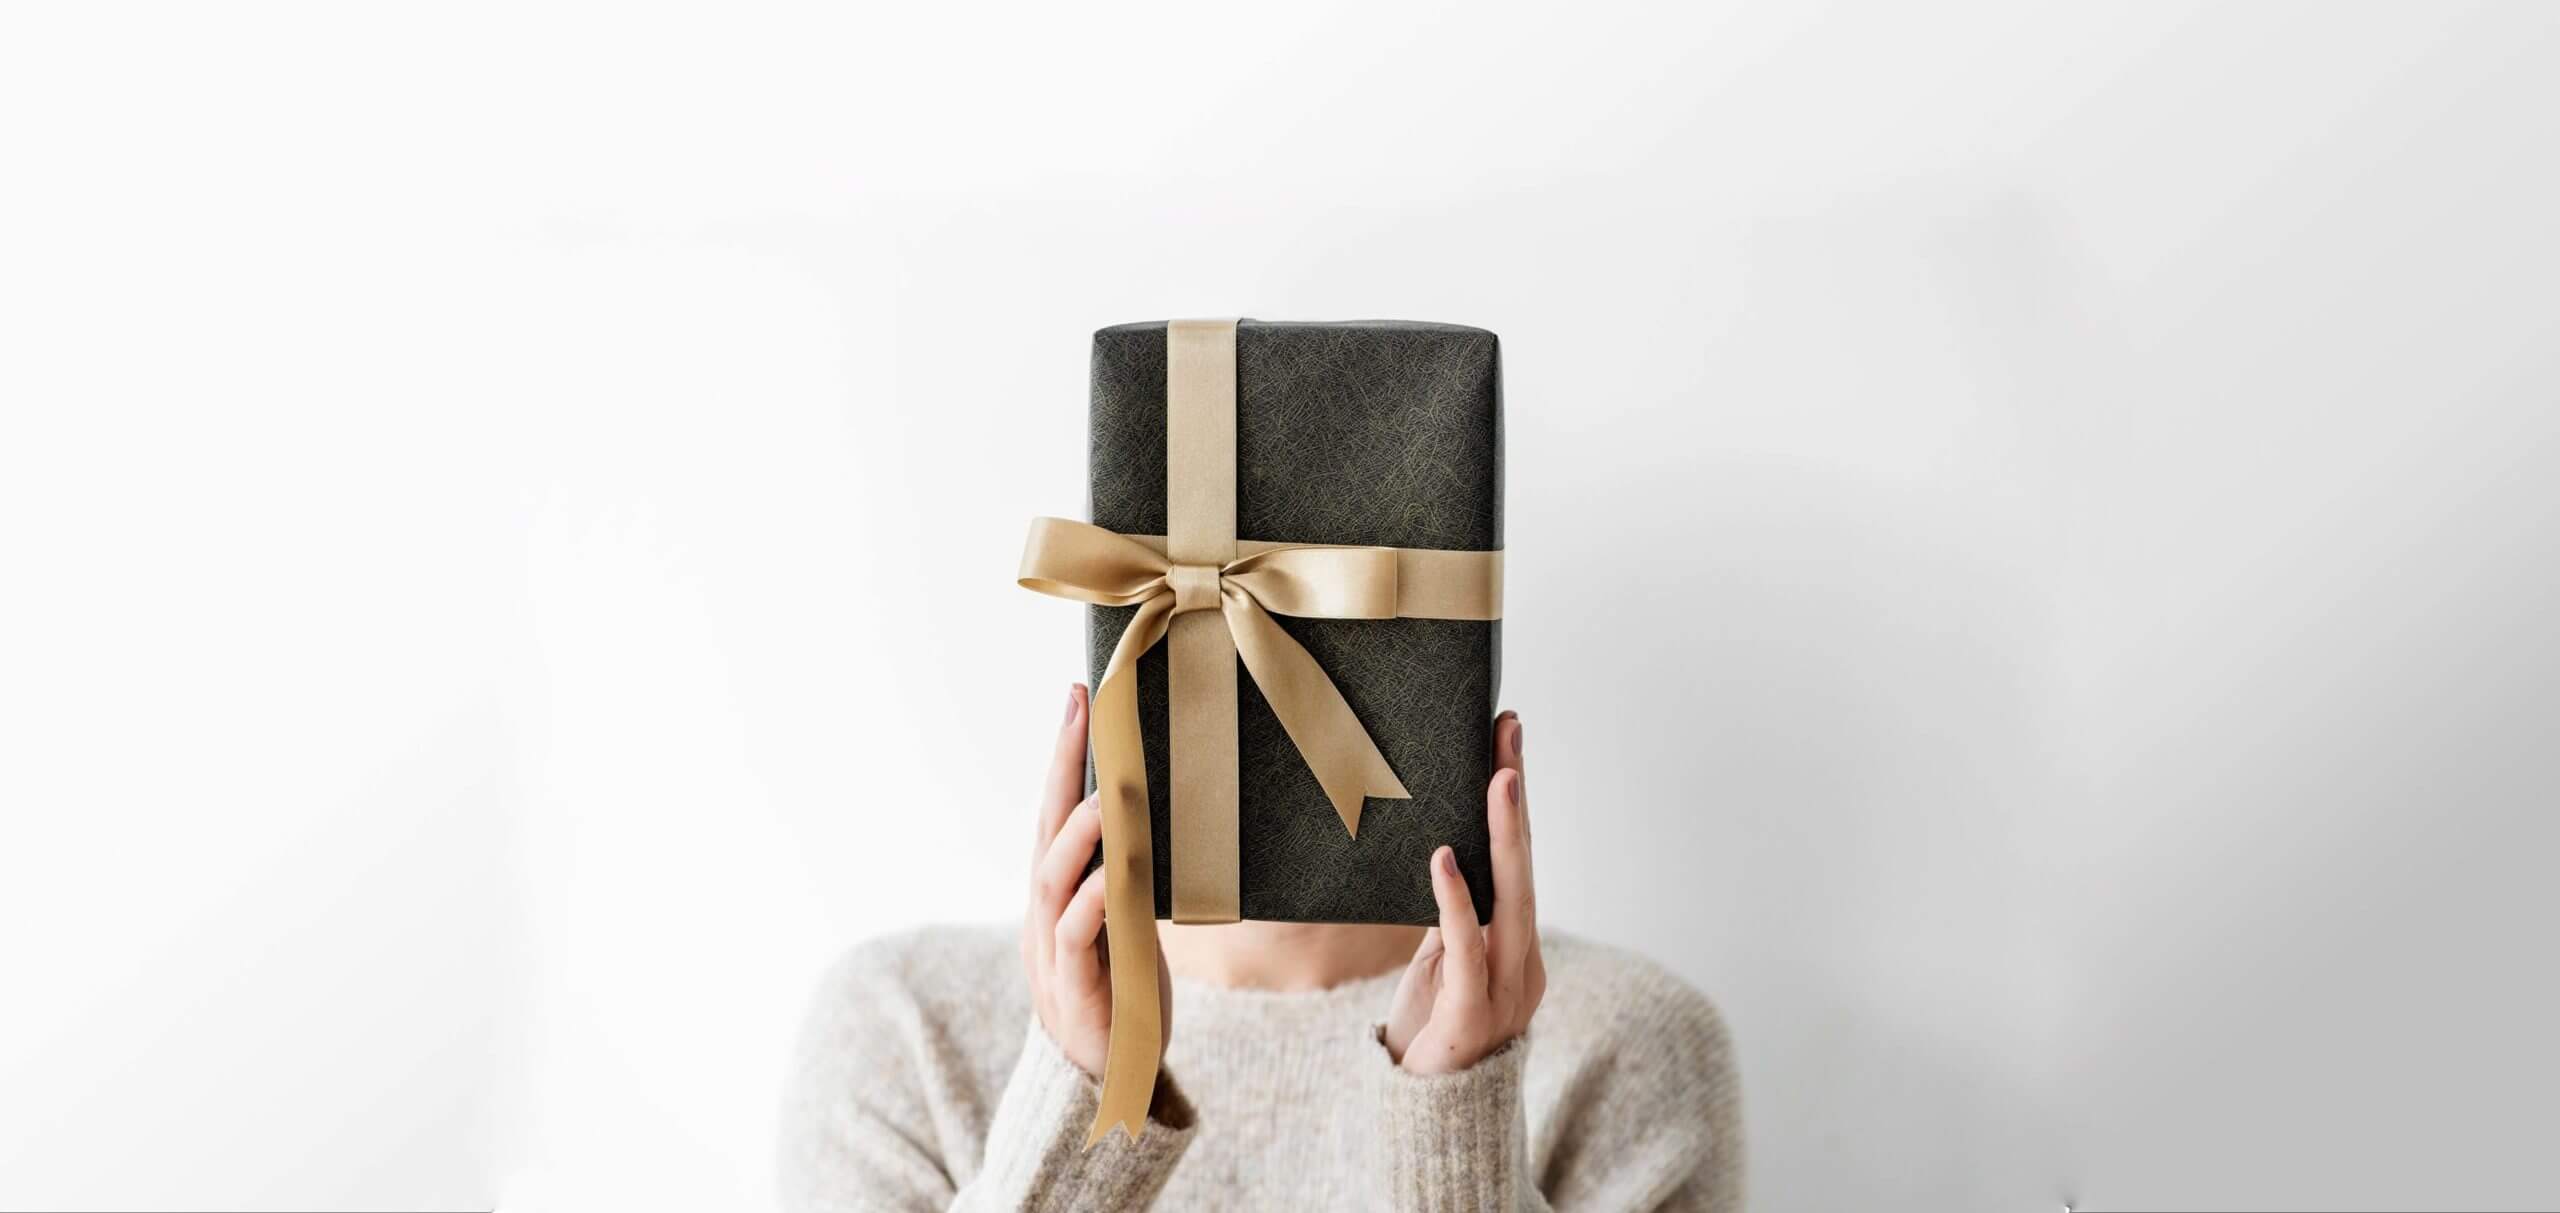 How Marketers Can Appeal to Self-gifters | Third Wunder